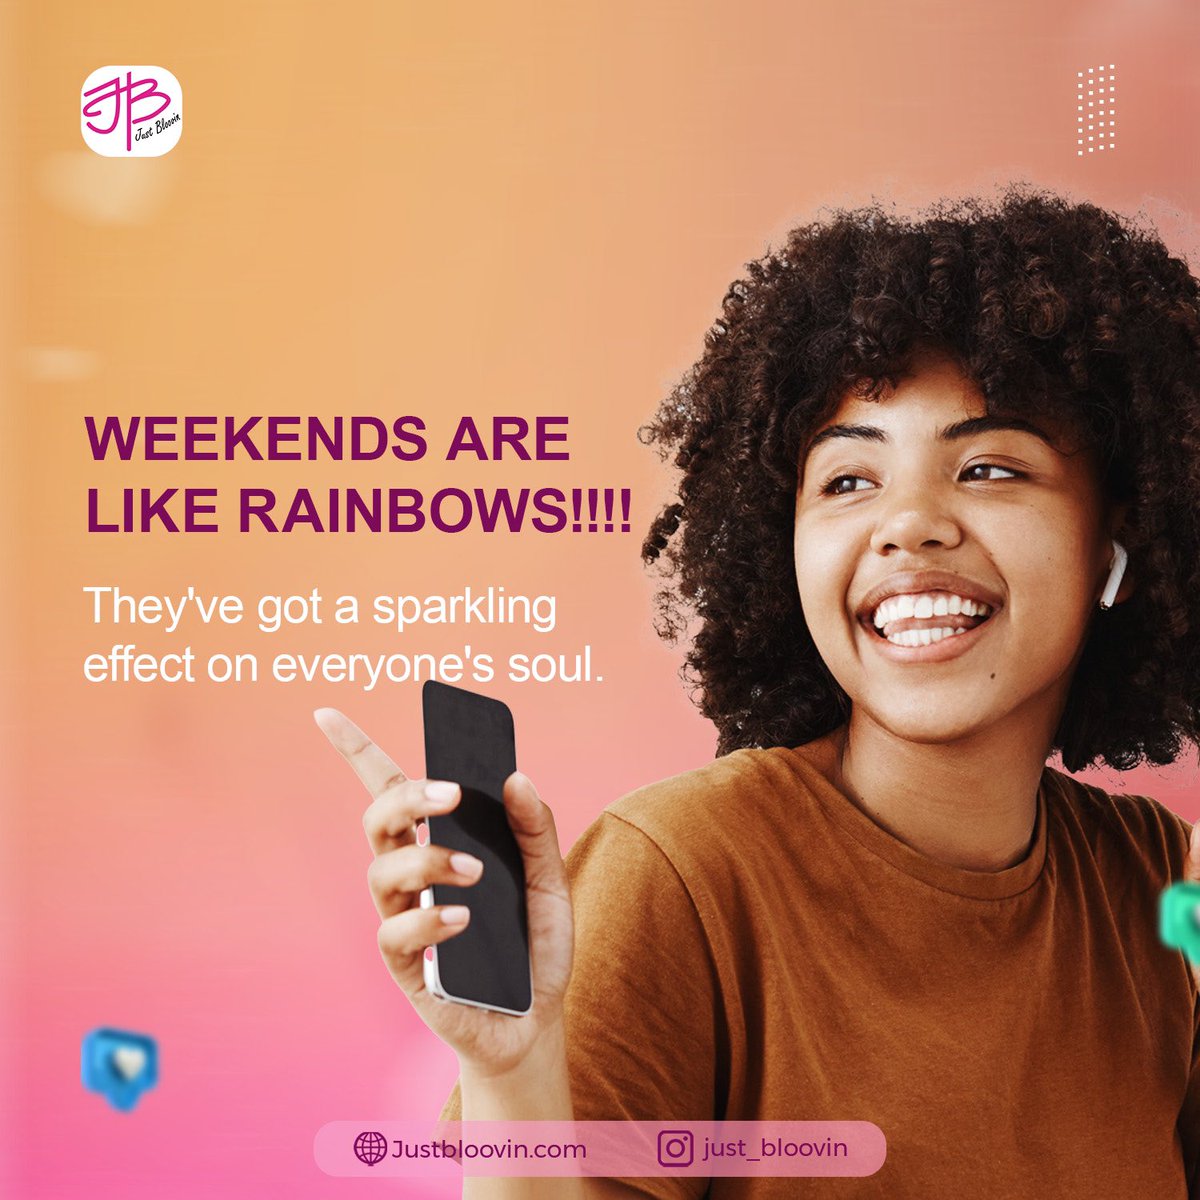 TGIF!!
 
Are your weekend plans as incredible as ours?

#ibloov #justbloovin #360camera #silentdisco #silentdiscoheadset #photobooth #friday #tgif #weekend